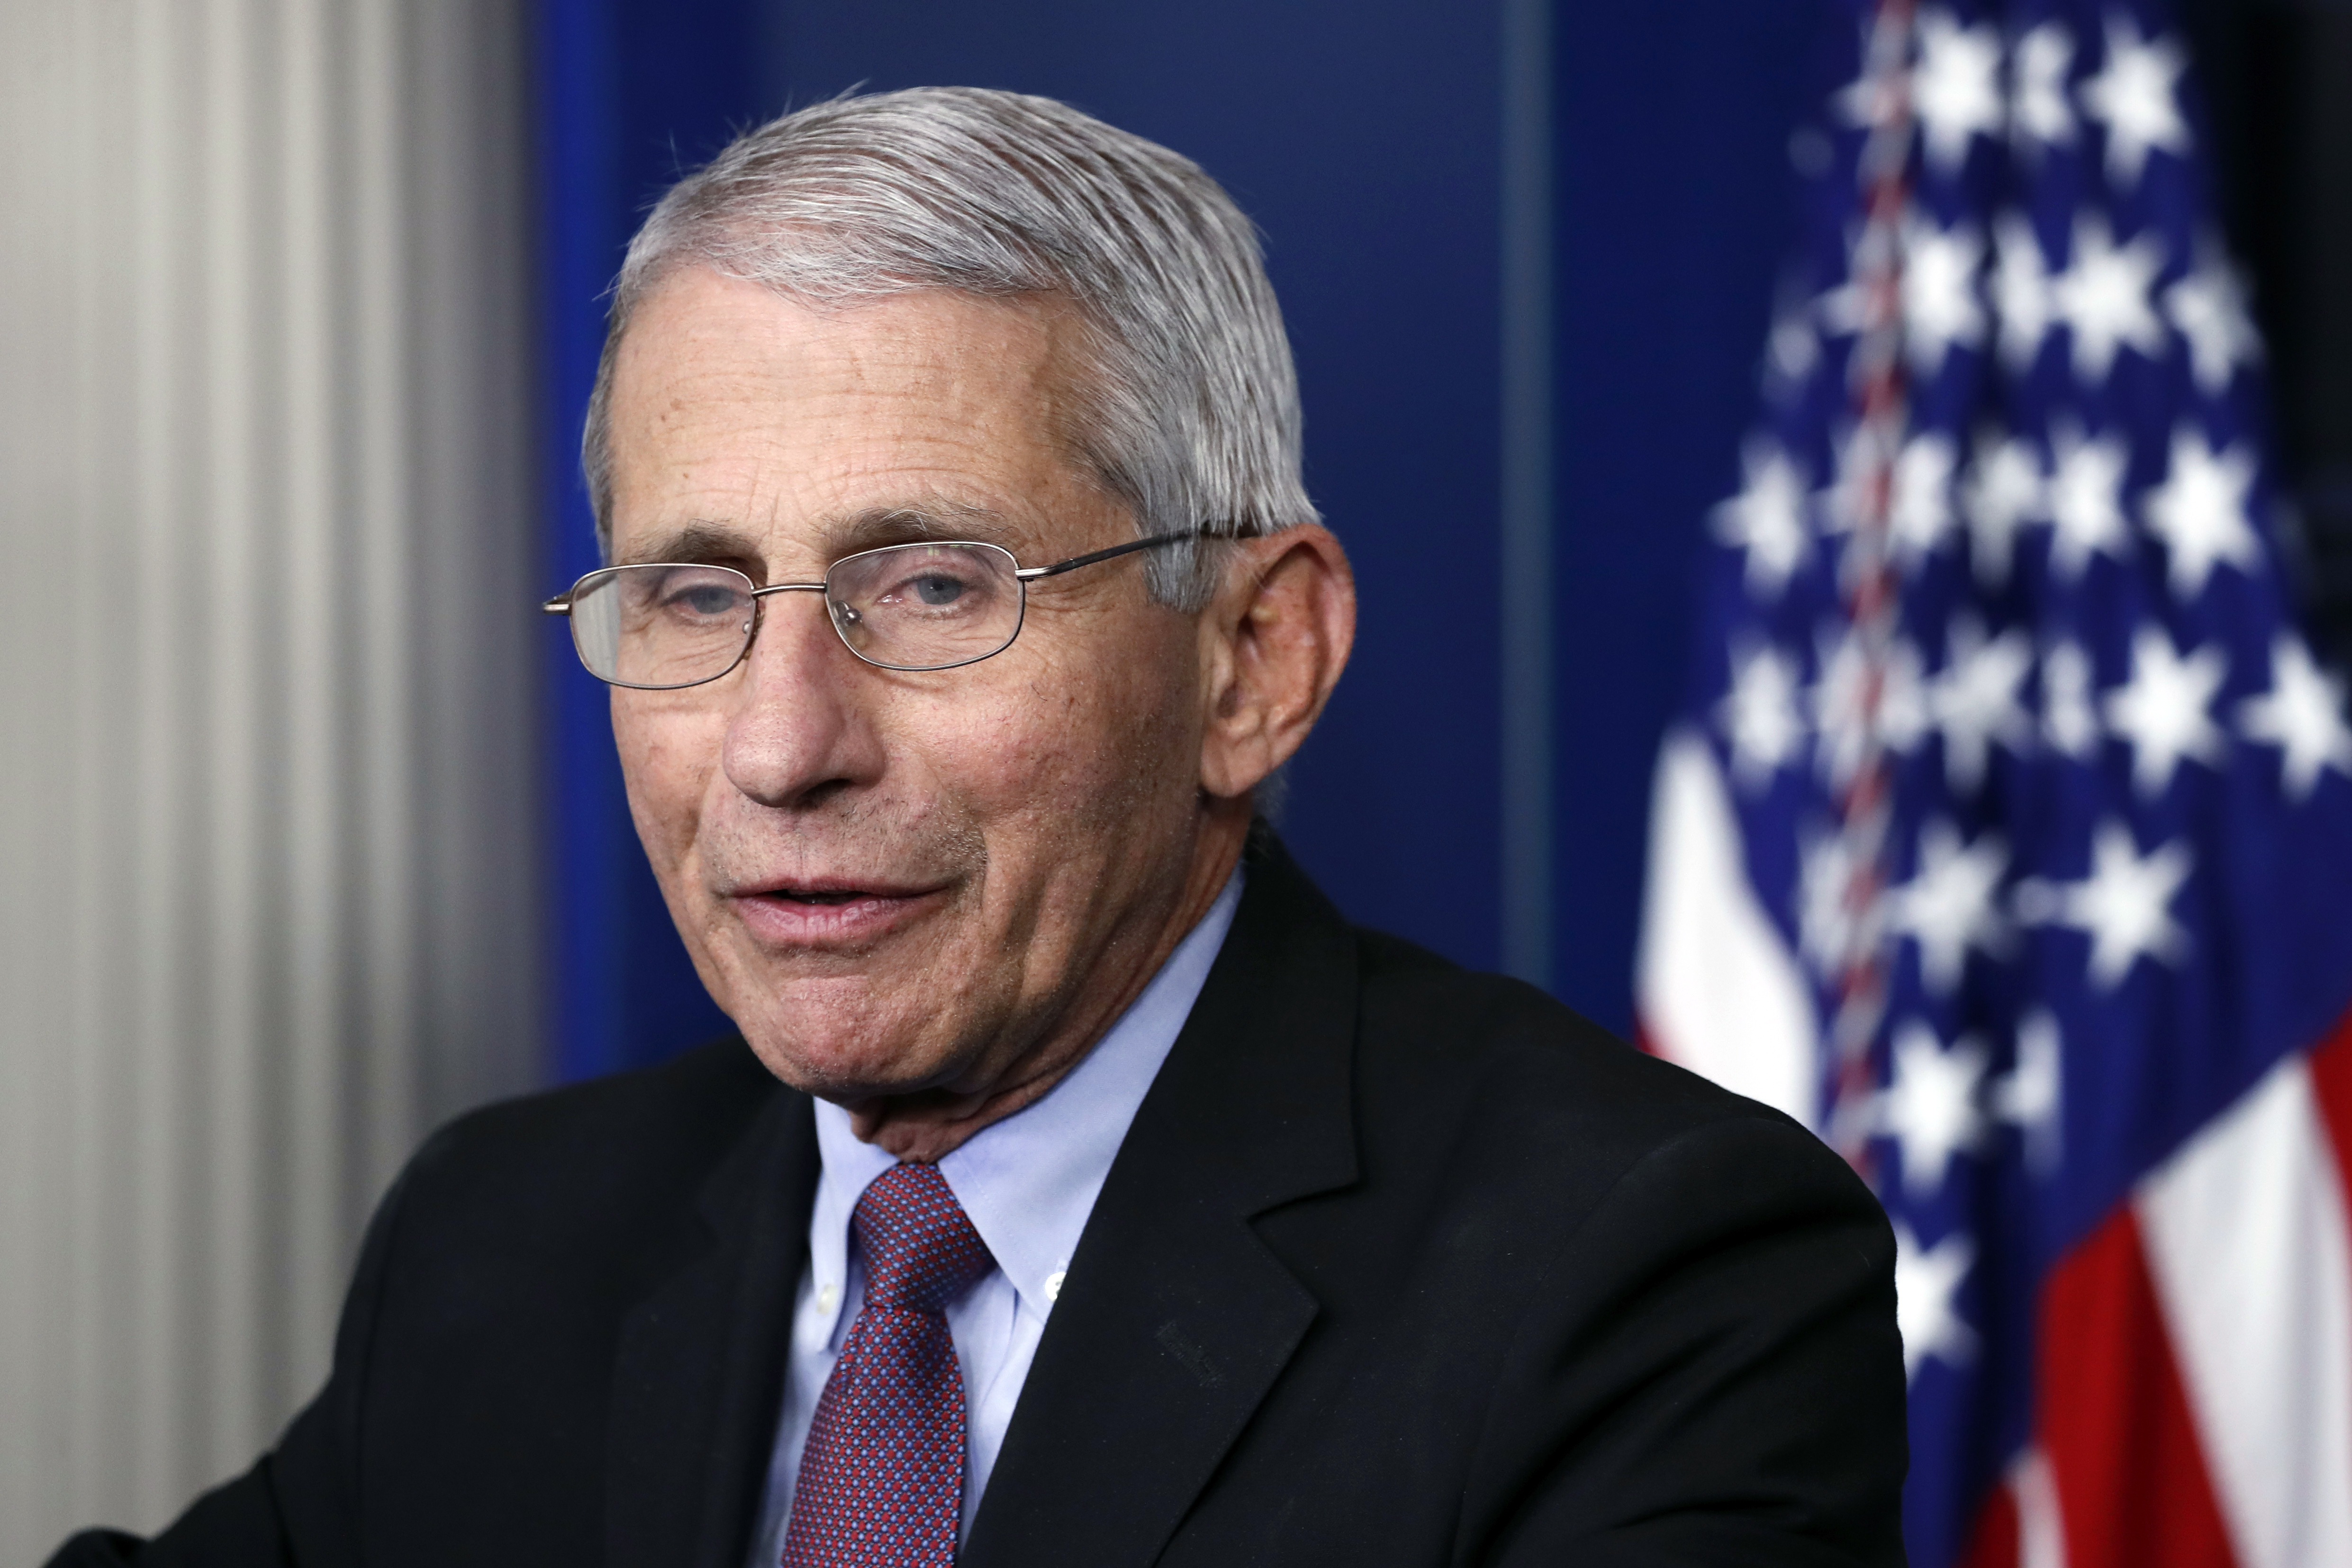 FILE - In this April 22, 2020, file photo, Dr. Anthony Fauci, director of the National Institute of Allergy and Infectious Diseases, speaks about the new coronavirus in the James Brady Press Briefing Room of the White House, in Washington. A Senate hearing on reopening workplaces and schools safely is turning into a teaching moment on the fickle nature of the coronavirus outbreak. Senior health officials, including Fauci, scheduled to testify in person before the Health, Education, Labor and Pensions committee on Tuesday, May 12 will instead appear via video link.  (AP Photo/Alex Brandon, File)